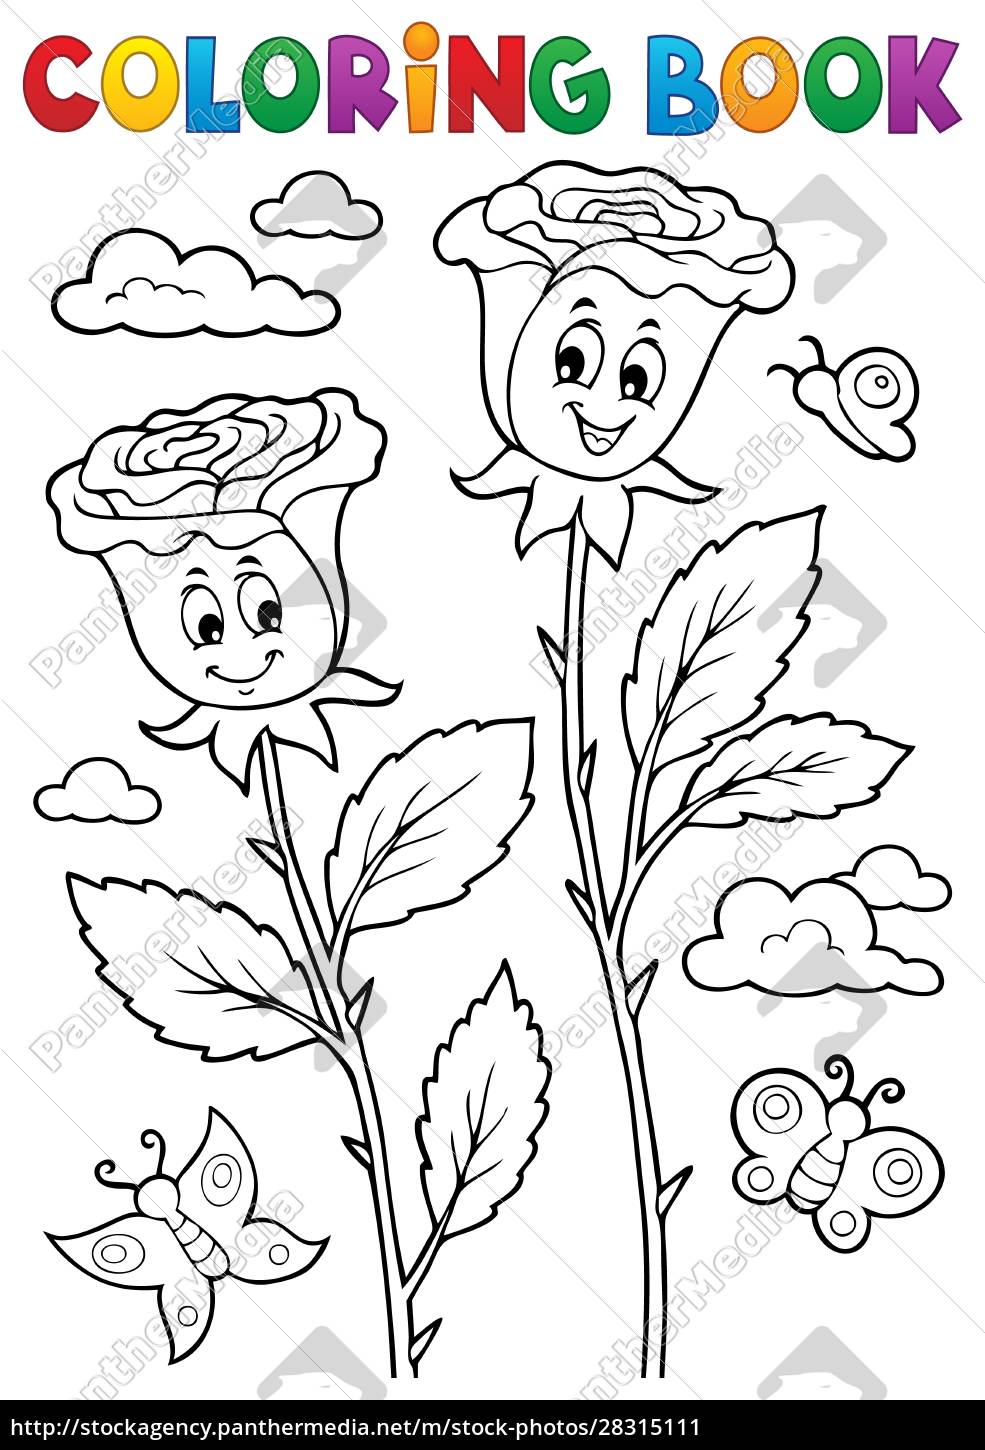 Download Coloring Book Rose Flower Image 2 Stock Photo 28315111 Panthermedia Stock Agency